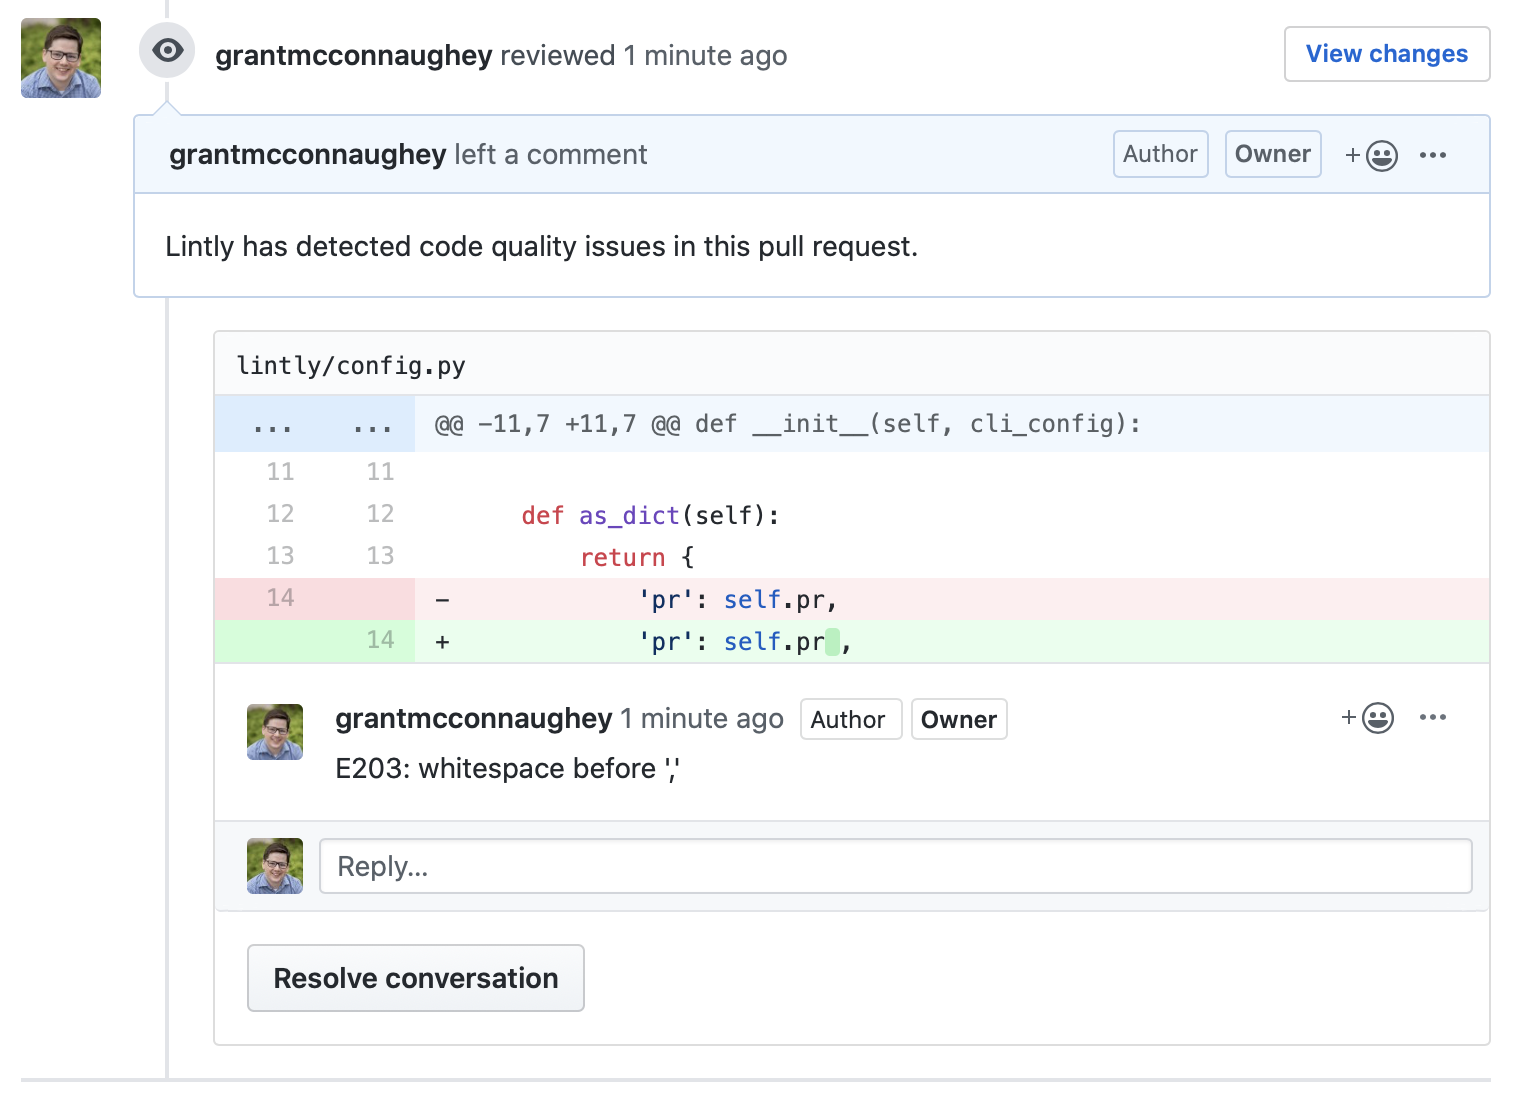 Lintly review on a pull request